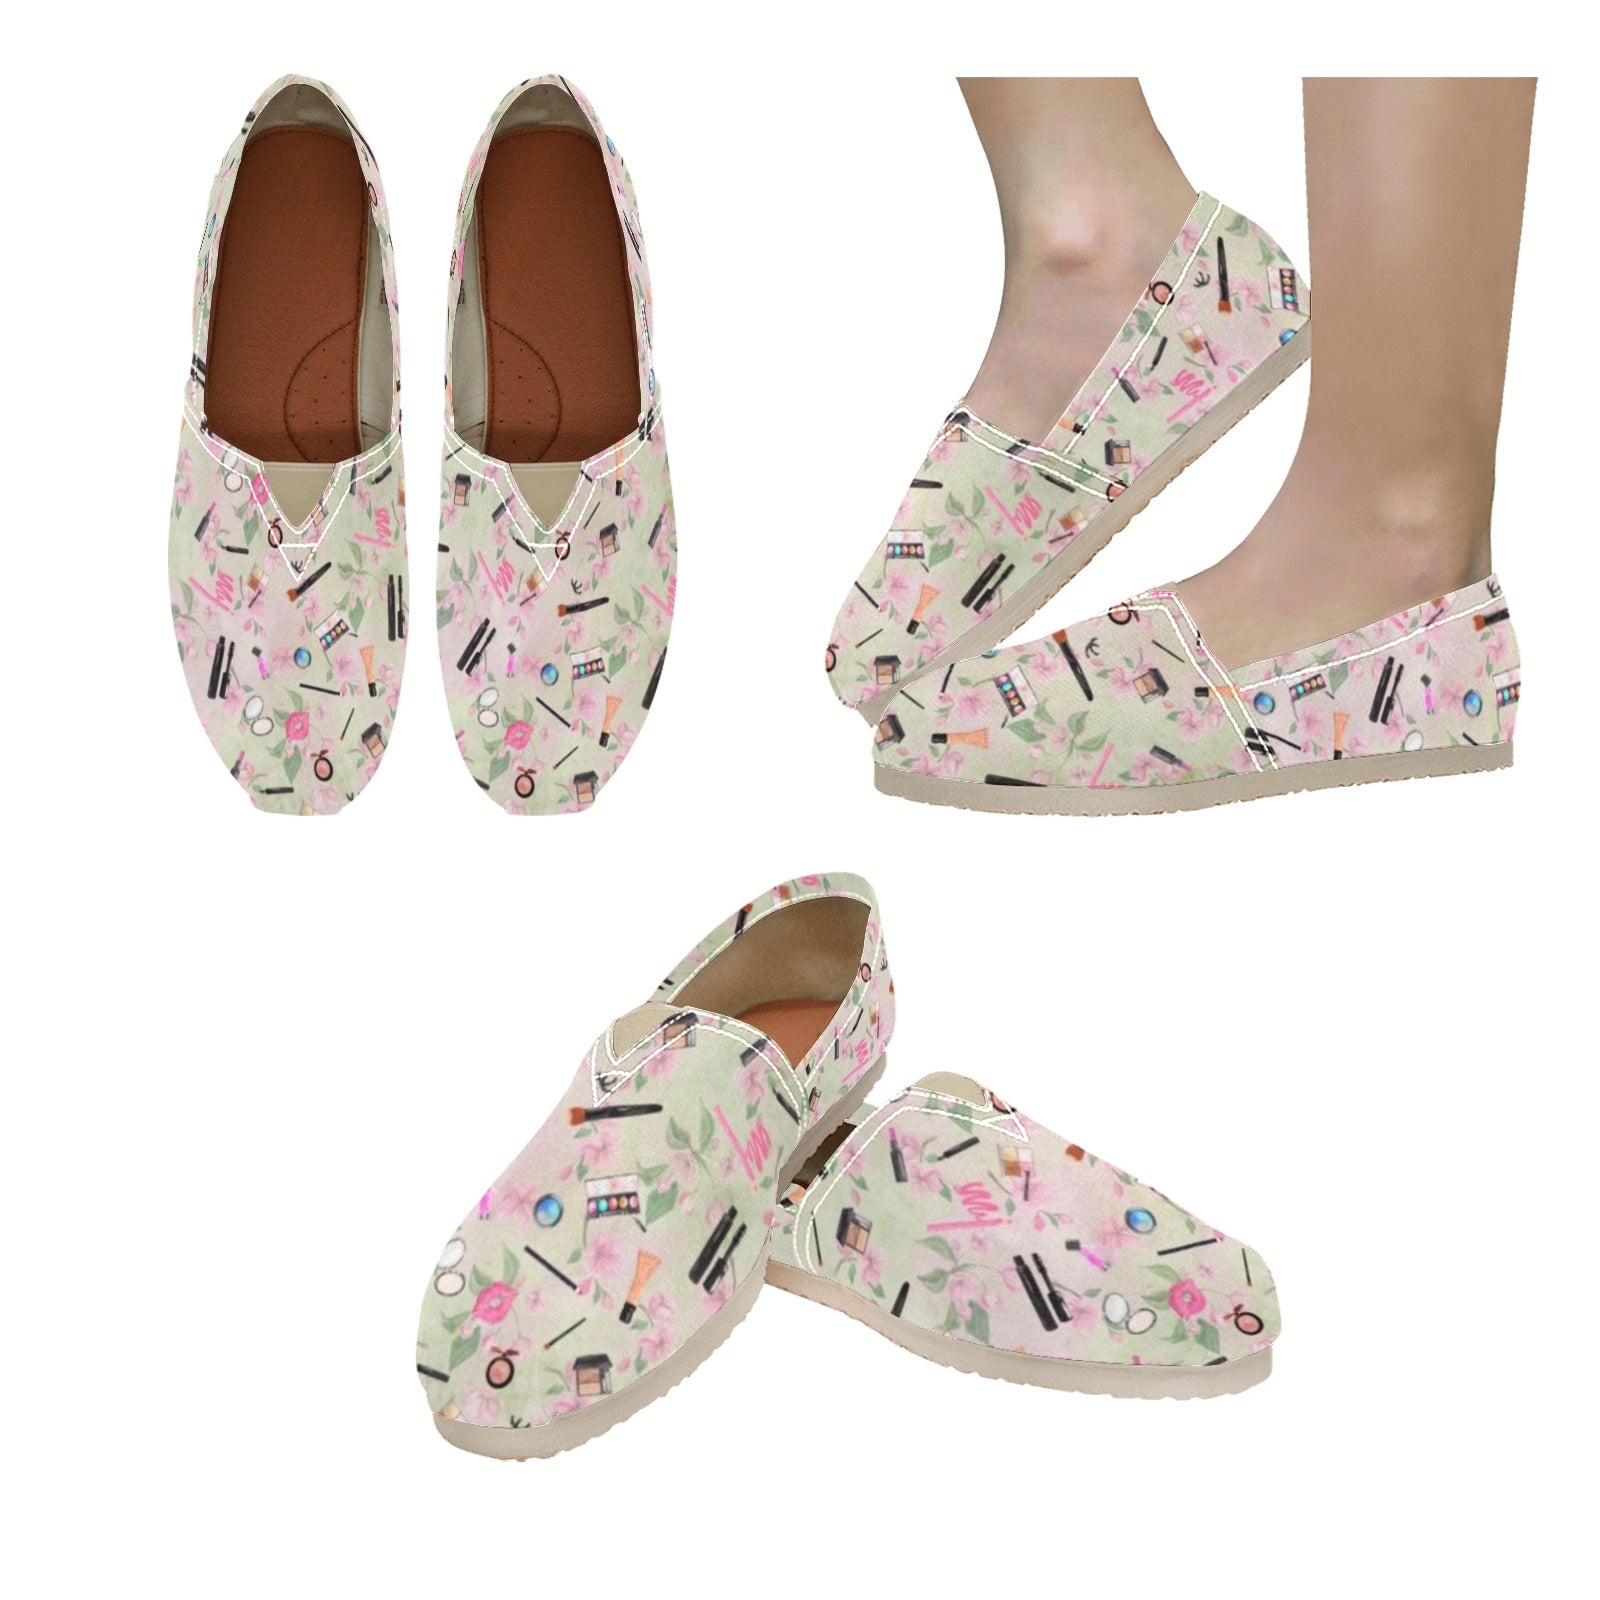 Makeup - Casual Canvas Slip-on Shoes